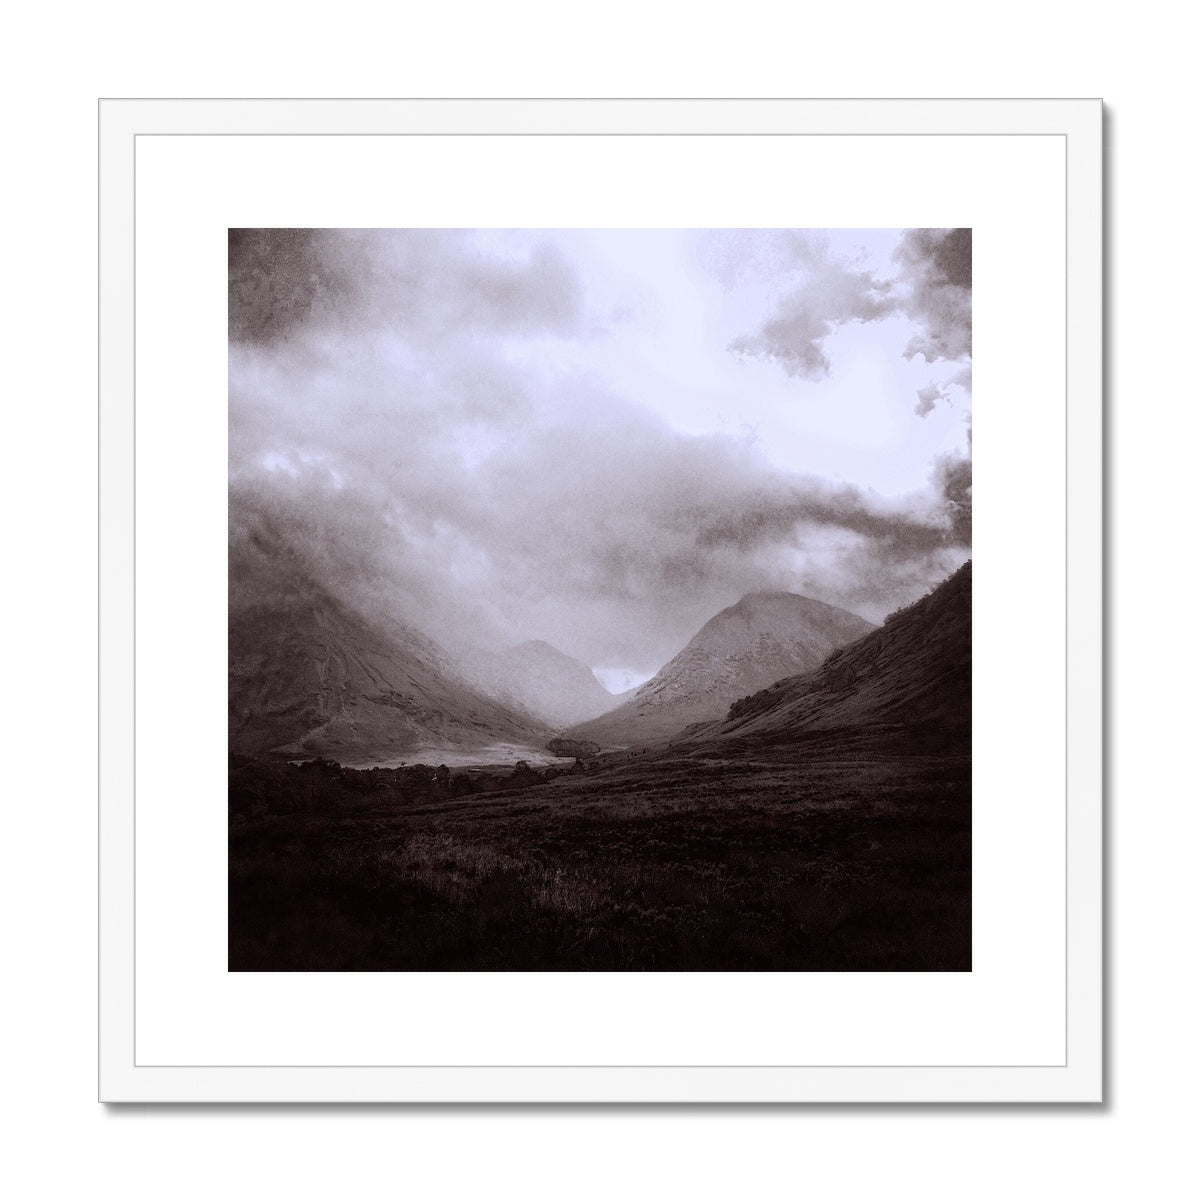 Glencoe Mist Painting | Framed & Mounted Prints From Scotland-Framed & Mounted Prints-Glencoe Art Gallery-20"x20"-White Frame-Paintings, Prints, Homeware, Art Gifts From Scotland By Scottish Artist Kevin Hunter